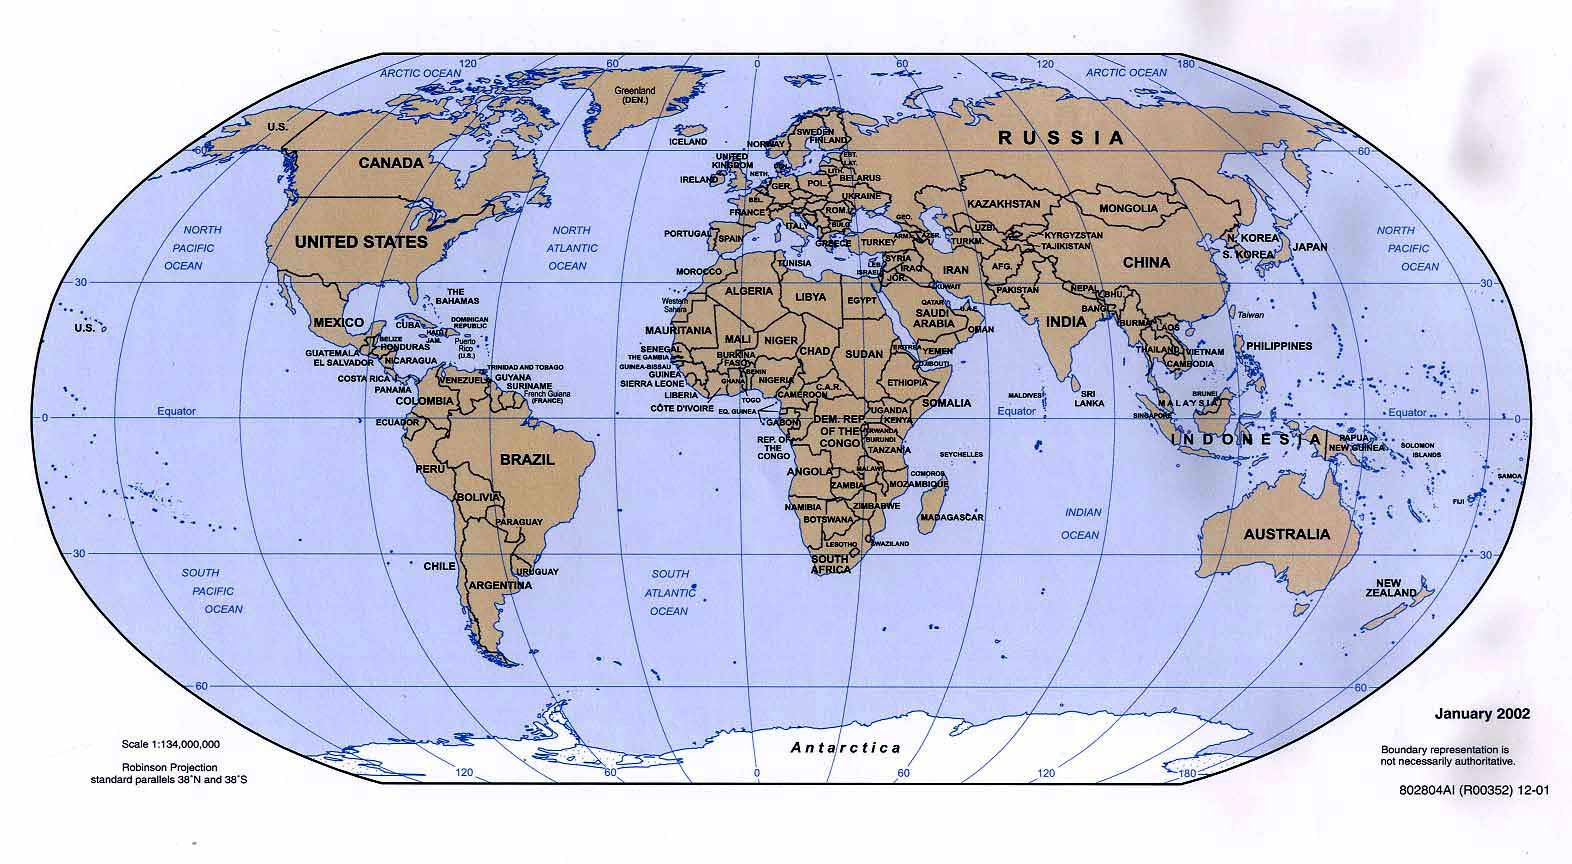 World Map Tropic Of Cancer